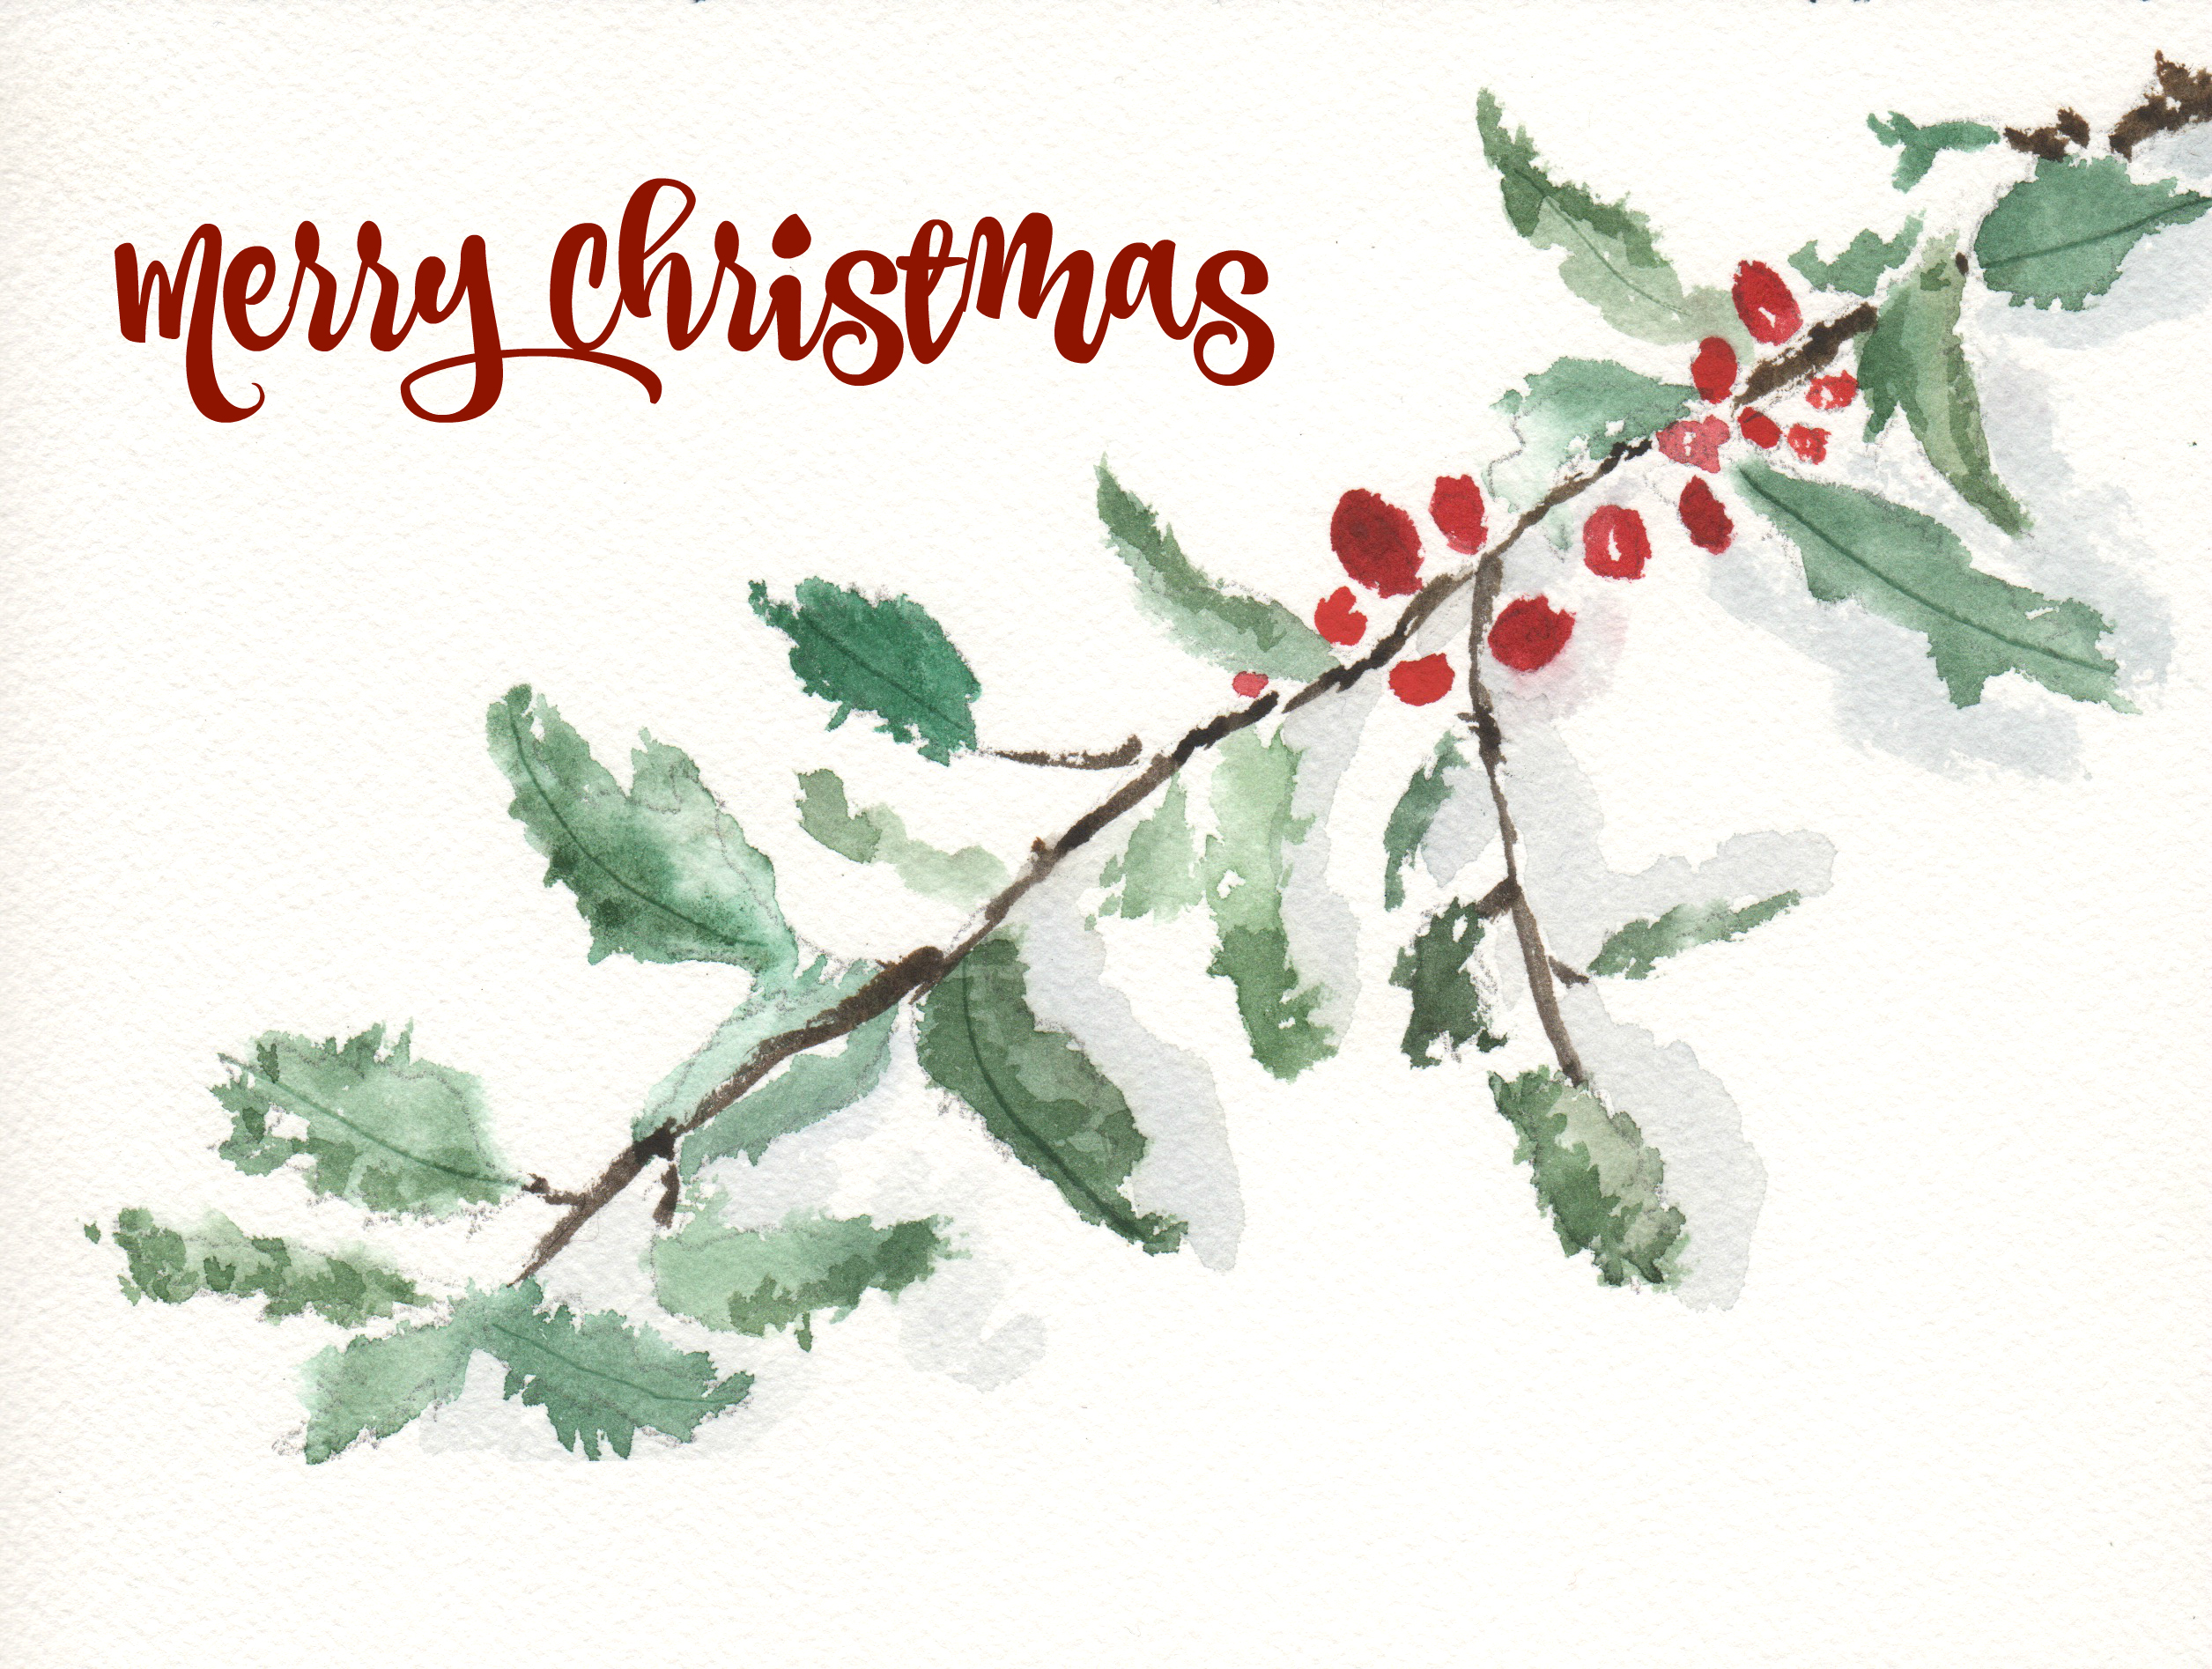 https://www.findingsilverpennies.com/wp-content/uploads/2015/11/Merry-Christmas-Watercolor-Free-Printable.jpg